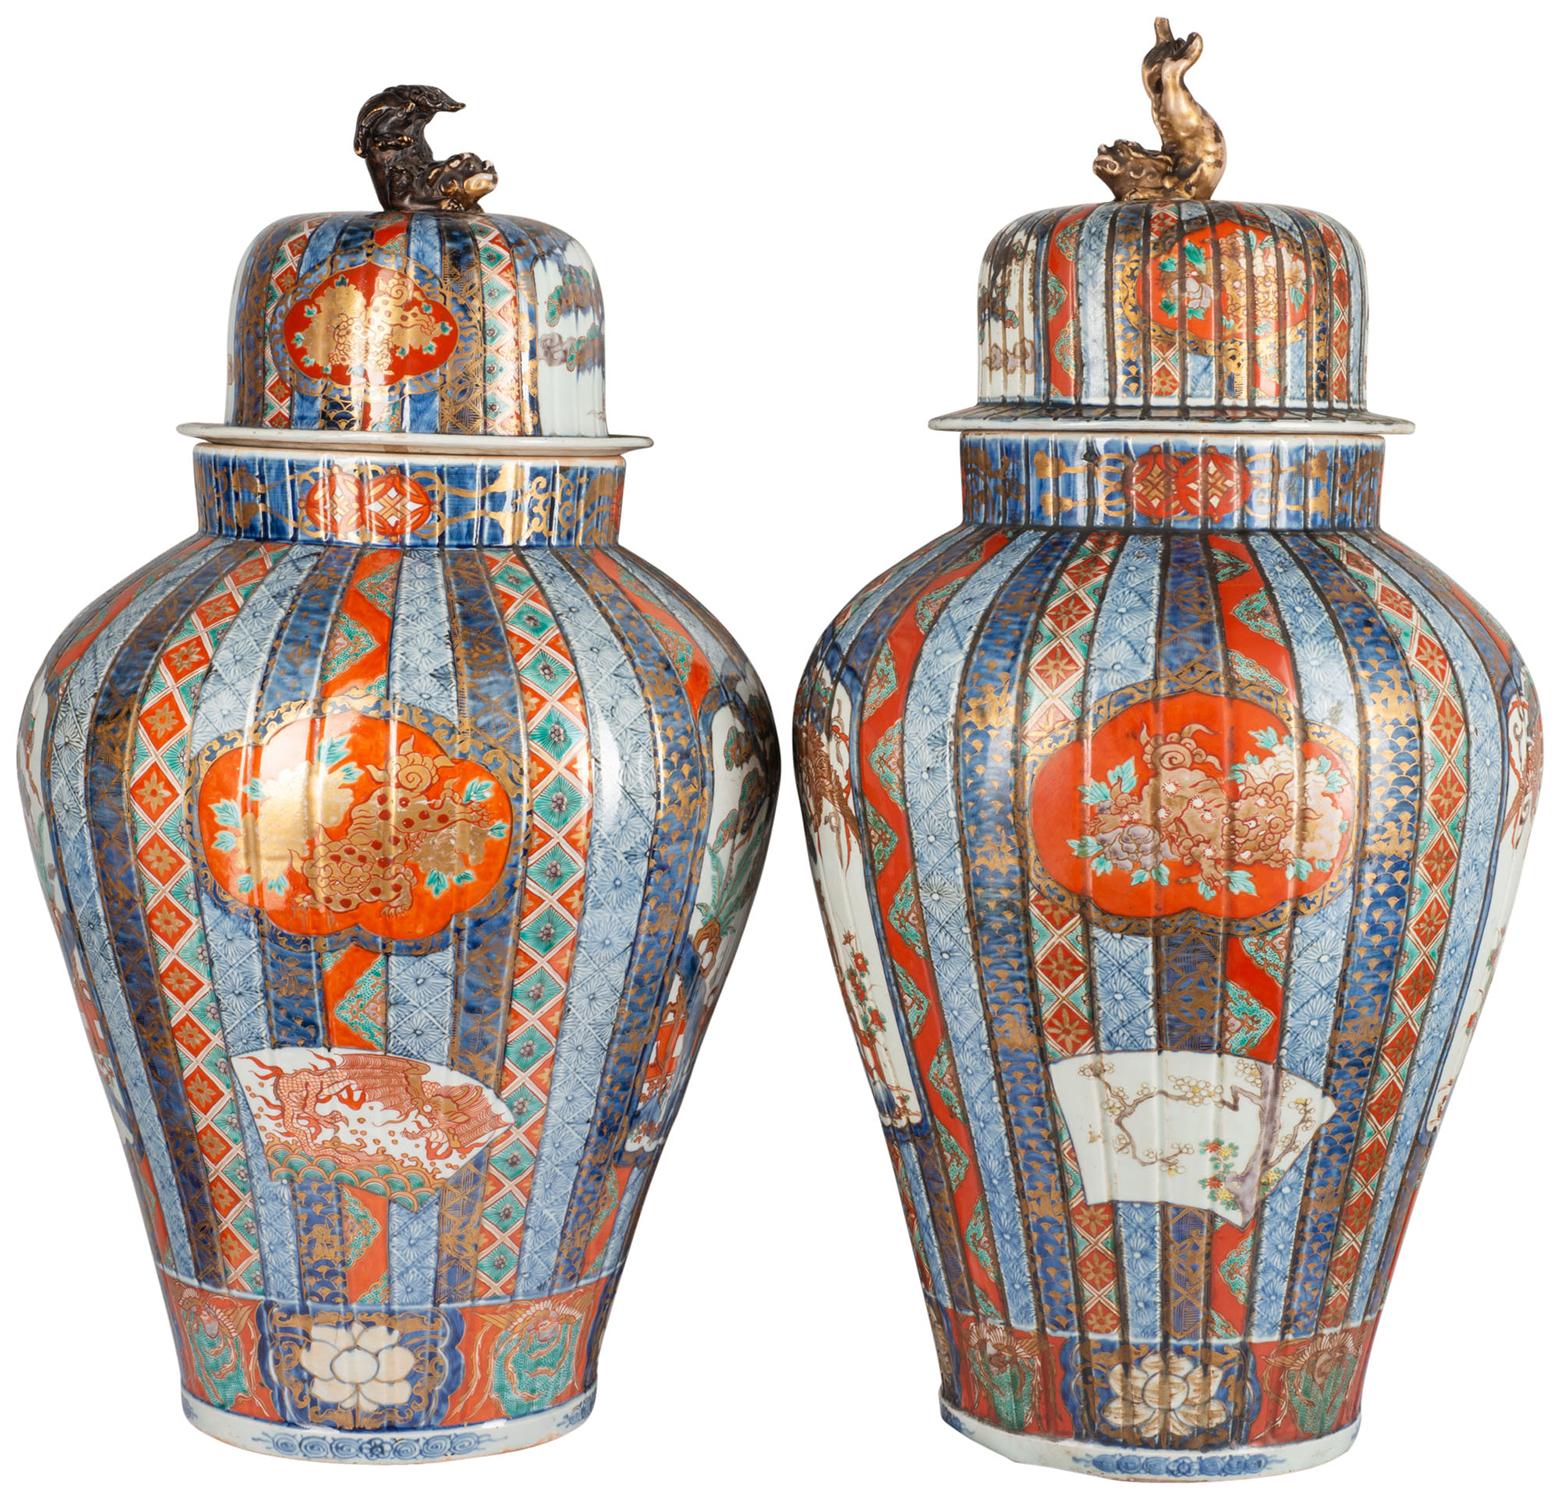 A very good quality pair of 19th century Japanese lidded Imari vases, each with mythical creatures as finials, the lids and vases with reeded detail, classical motif and floral decoration within. Inset painted panels depicting blossom trees, exotic